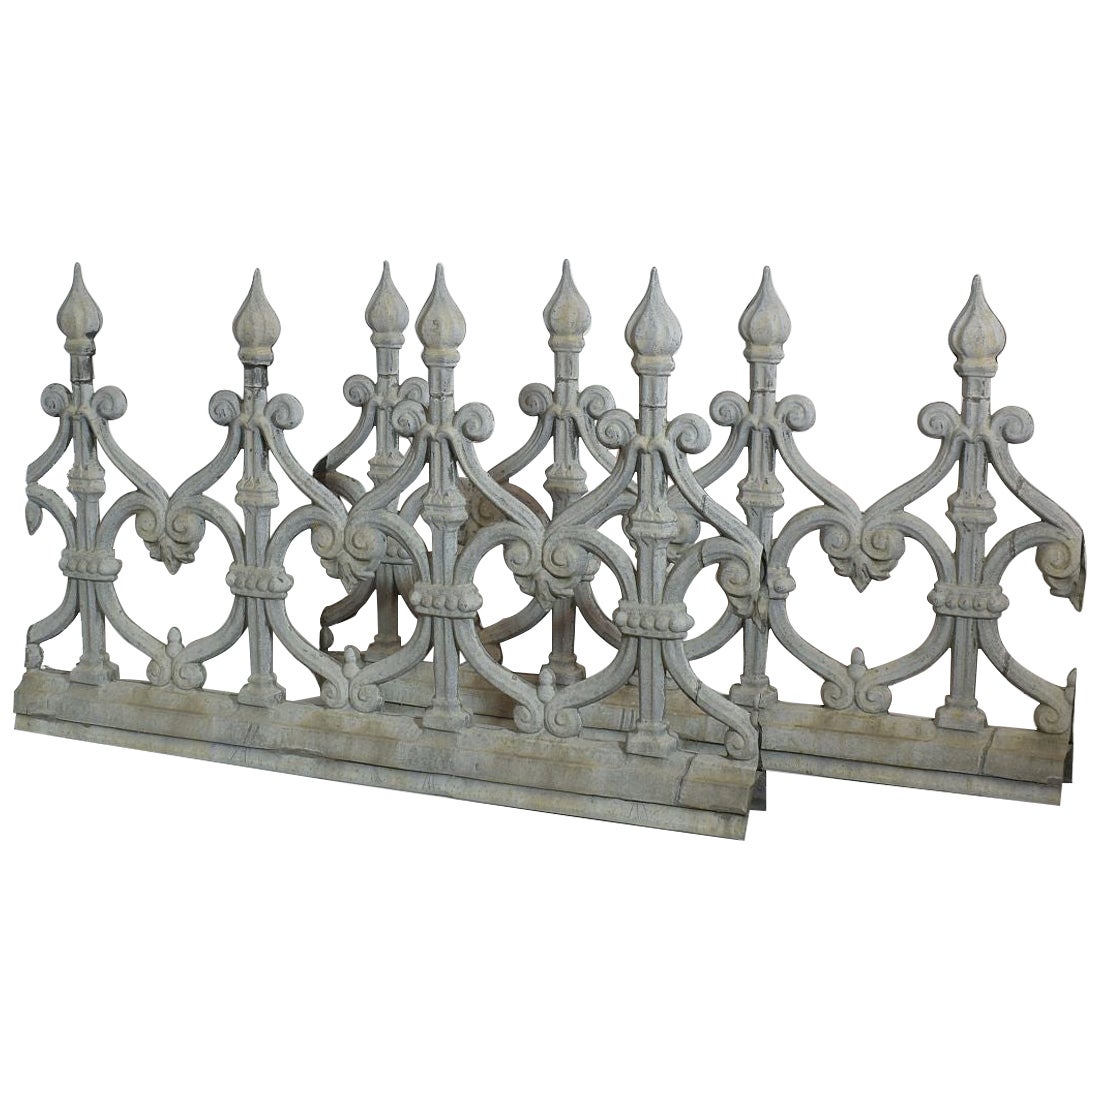 Pair of 19th Century French Zinc Architectural Roof Ornaments or Finials